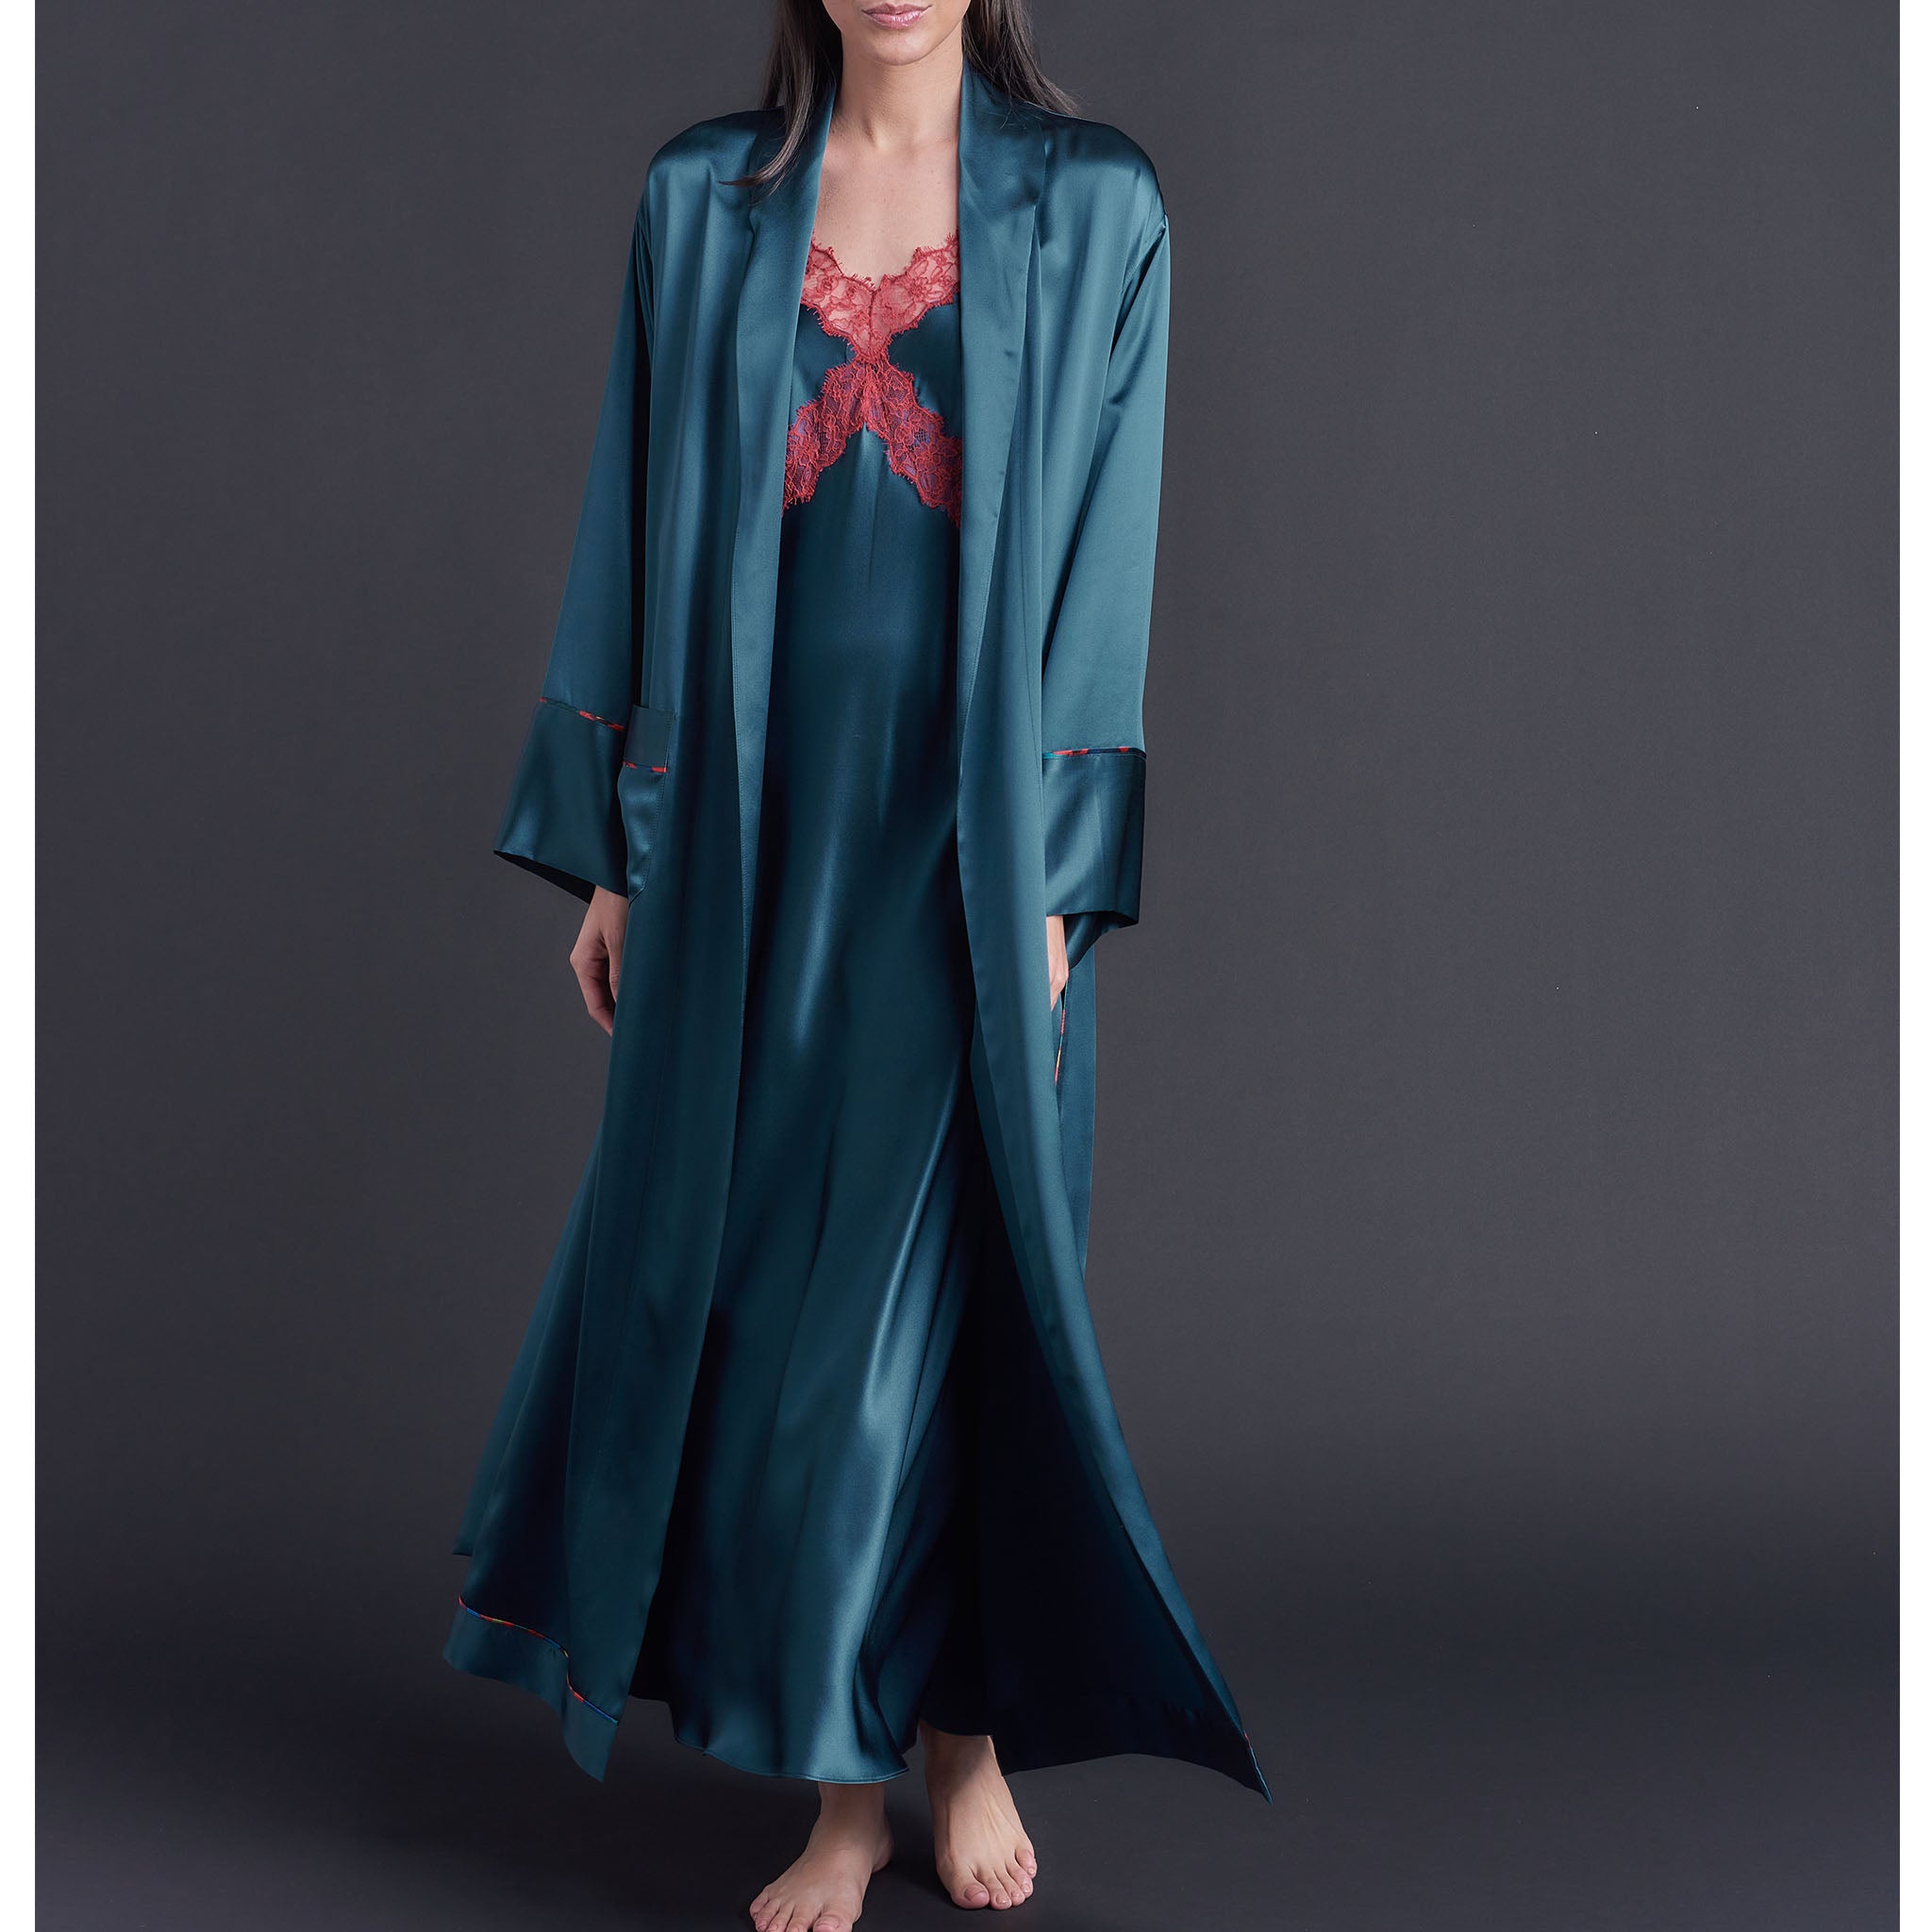 Long Claudette Robe in Peacock Silk Charmeuse